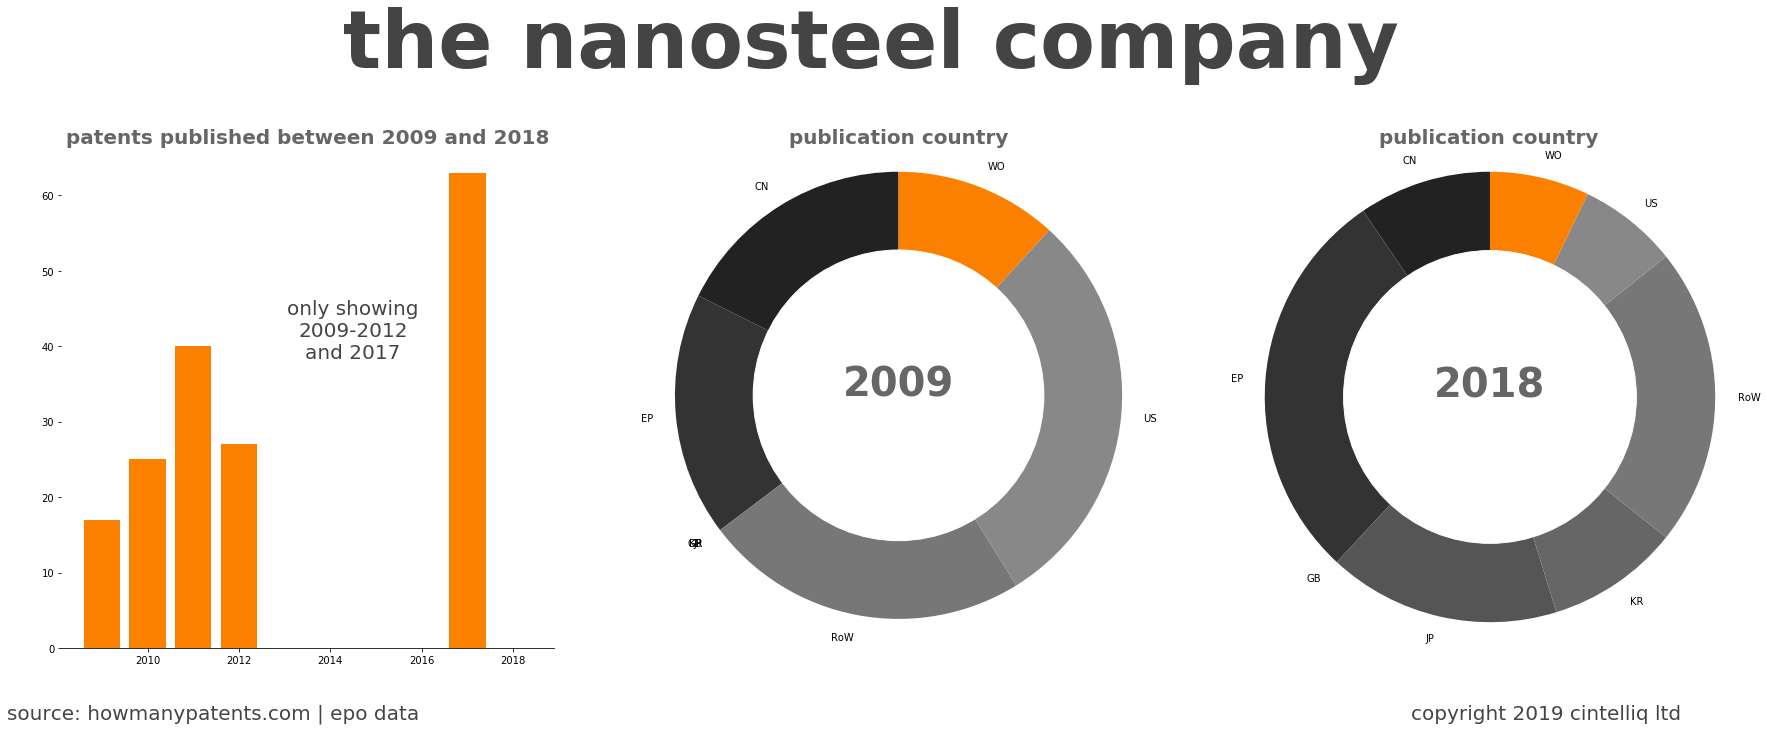 summary of patents for The Nanosteel Company